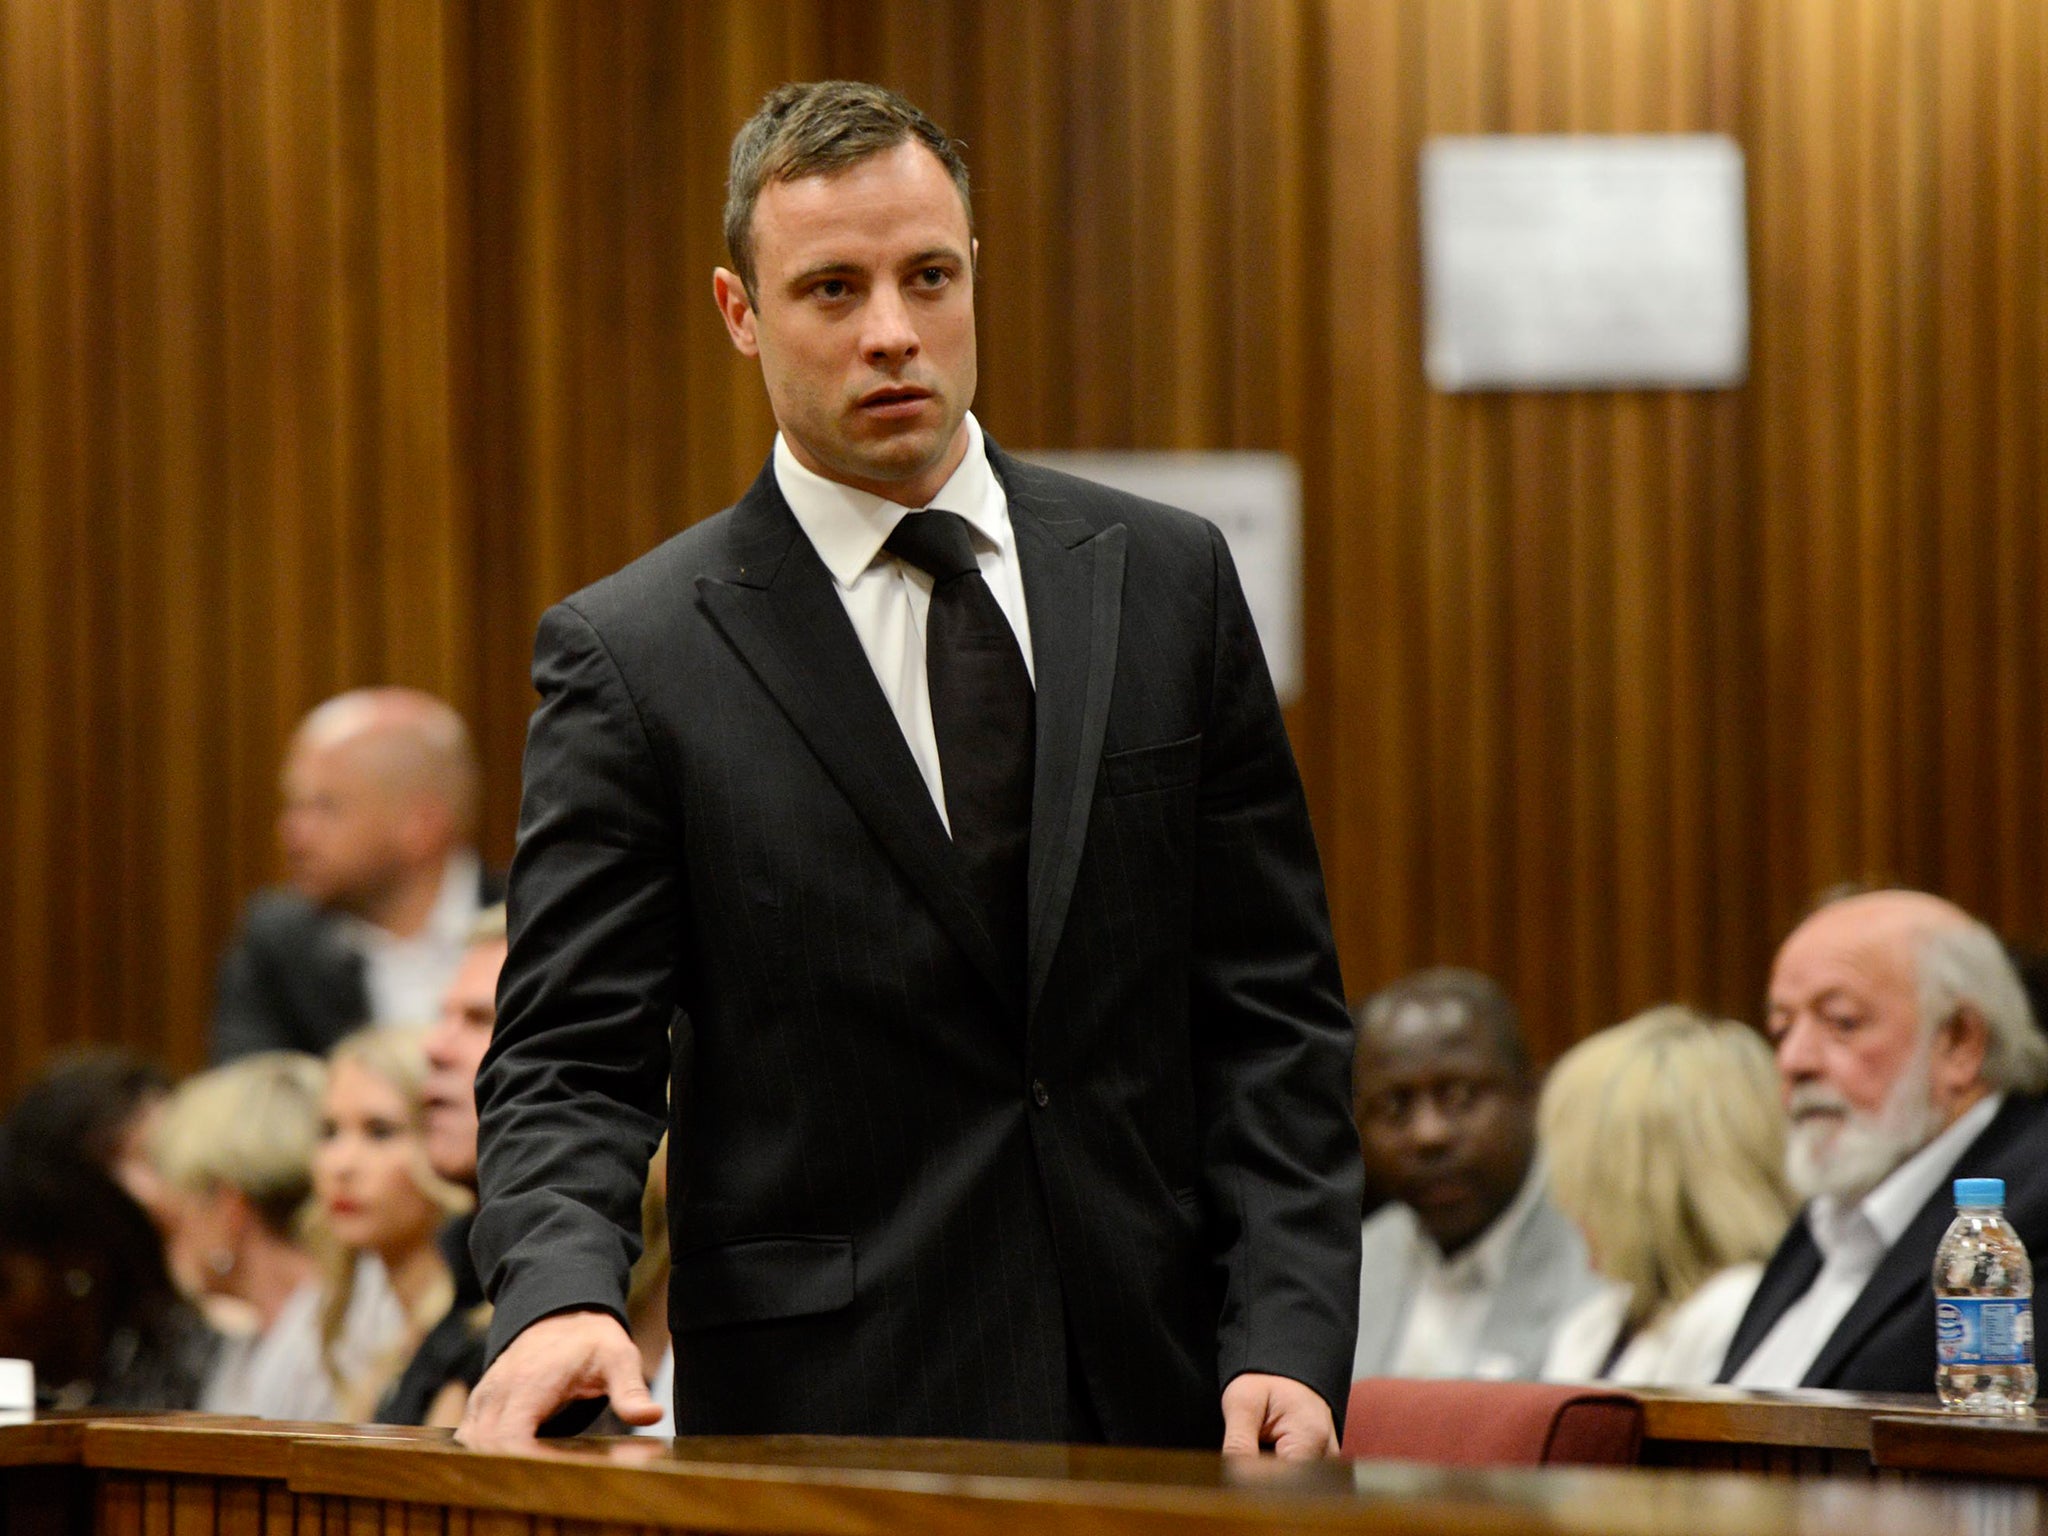 Oscar Pistorius arrives in court on day six of sentencing procedures at the High Court in Pretoria